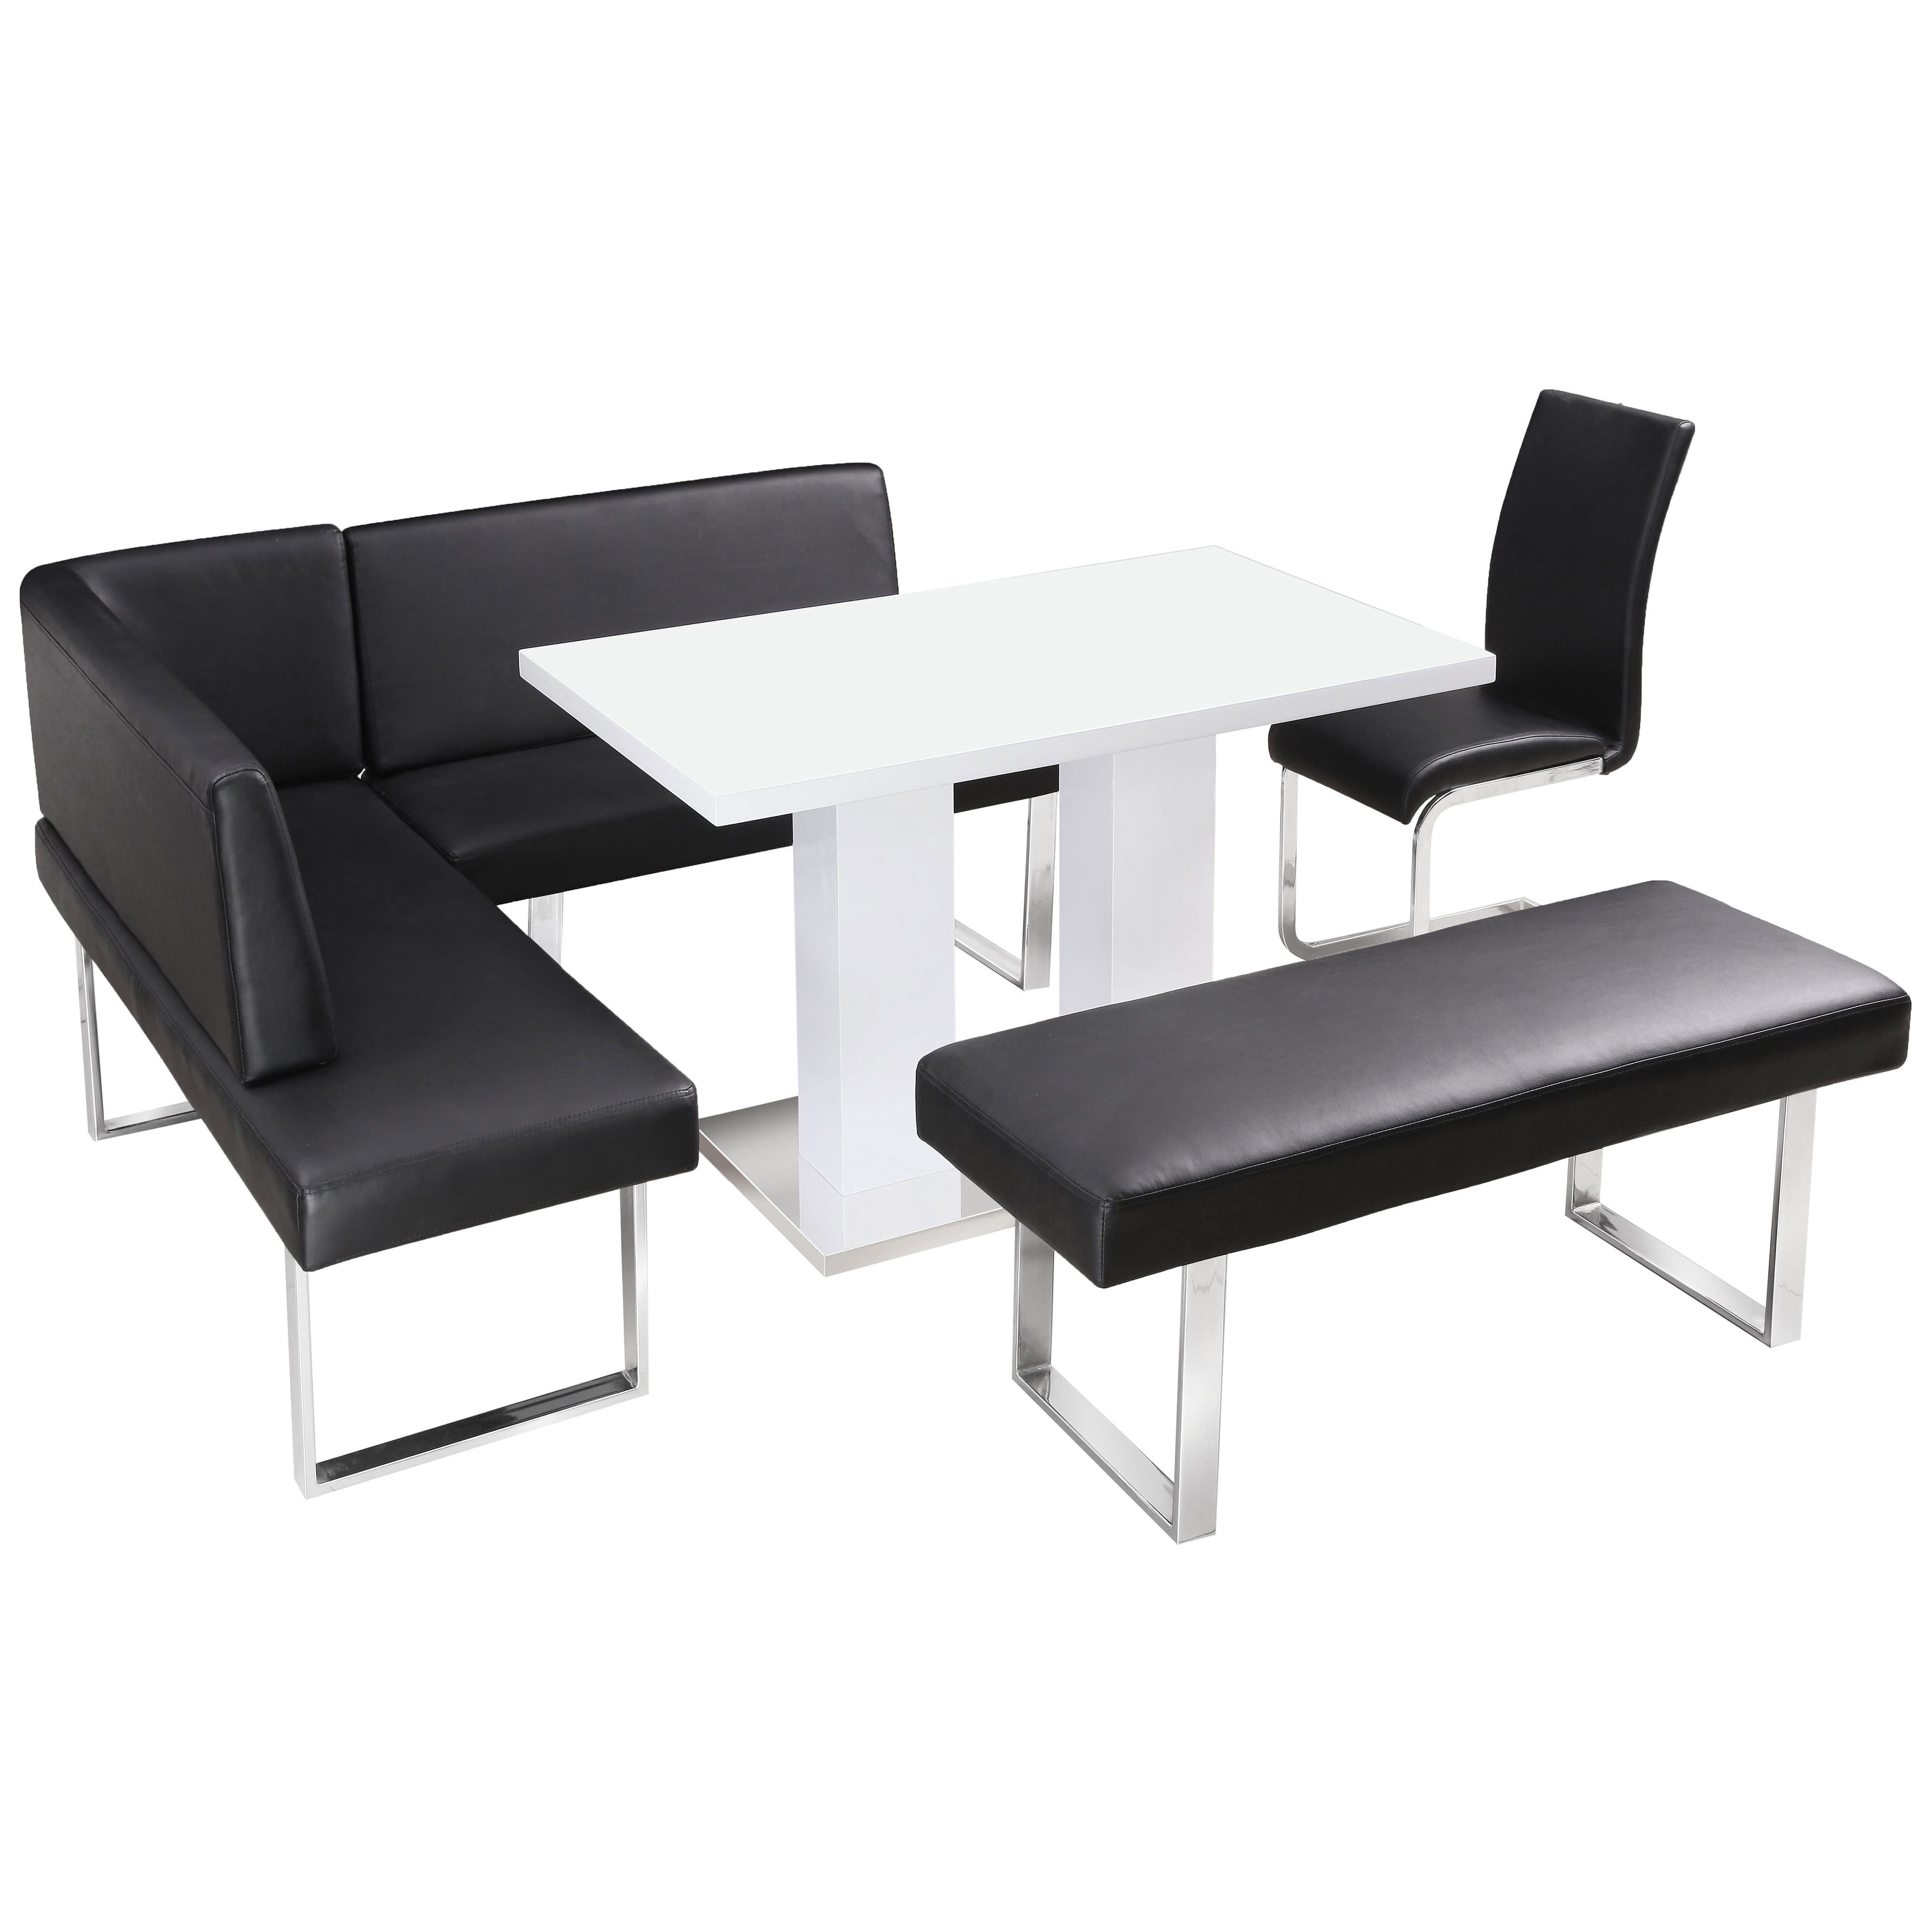 Black High Gloss Dining Tables Intended For Latest High Gloss Dining Table And Chair Set With Corner Bench & 1 Seat (View 22 of 25)